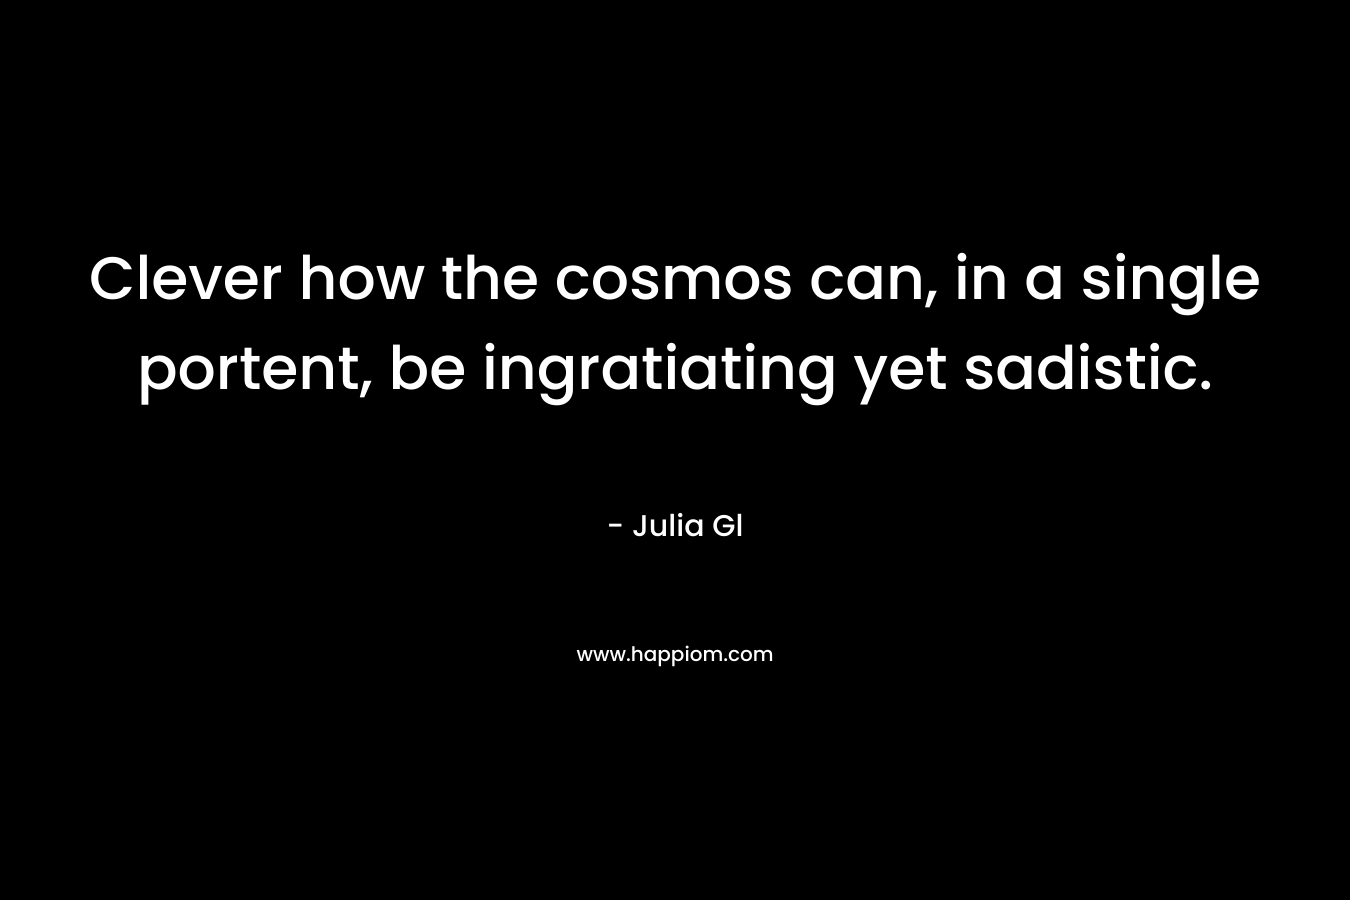 Clever how the cosmos can, in a single portent, be ingratiating yet sadistic. – Julia Gl